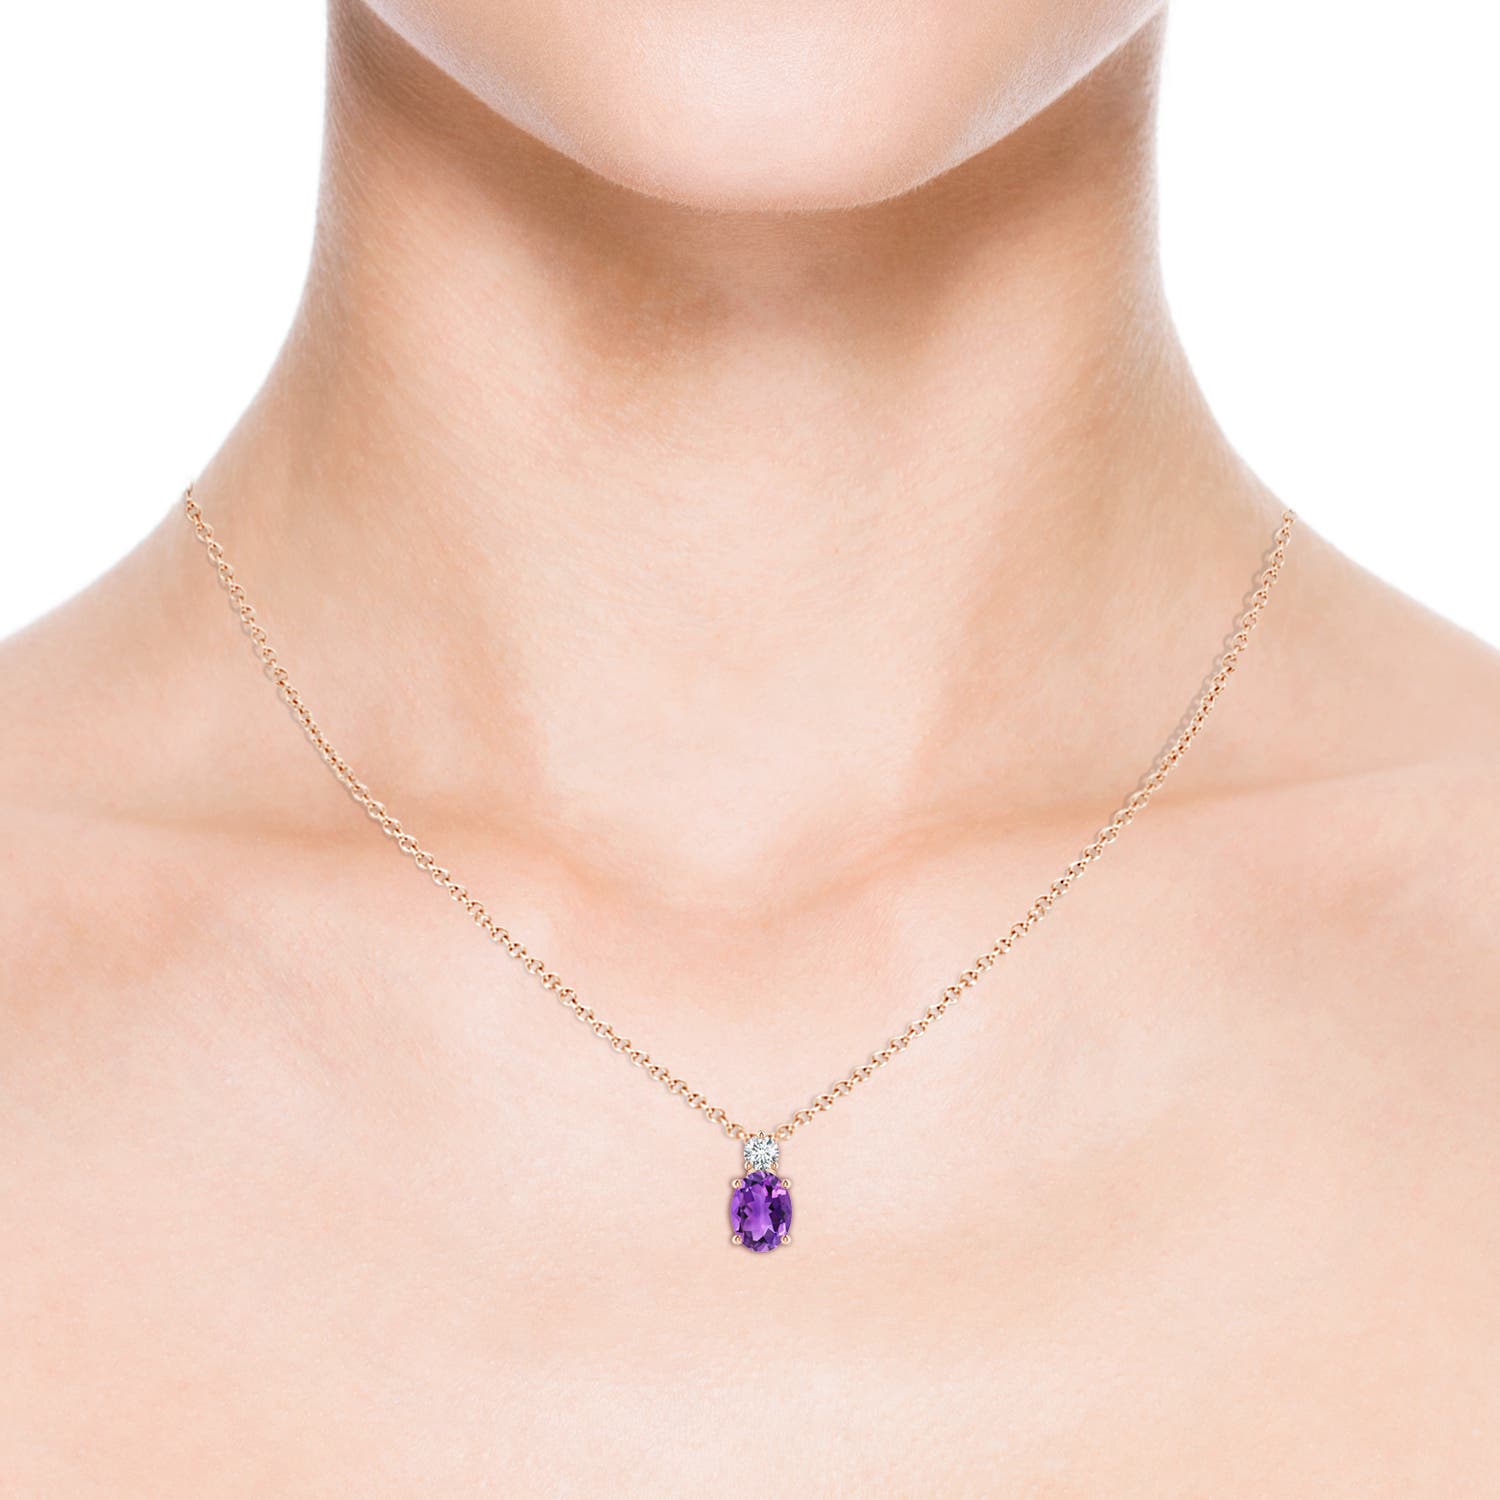 AAA - Amethyst / 1.31 CT / 14 KT Rose Gold